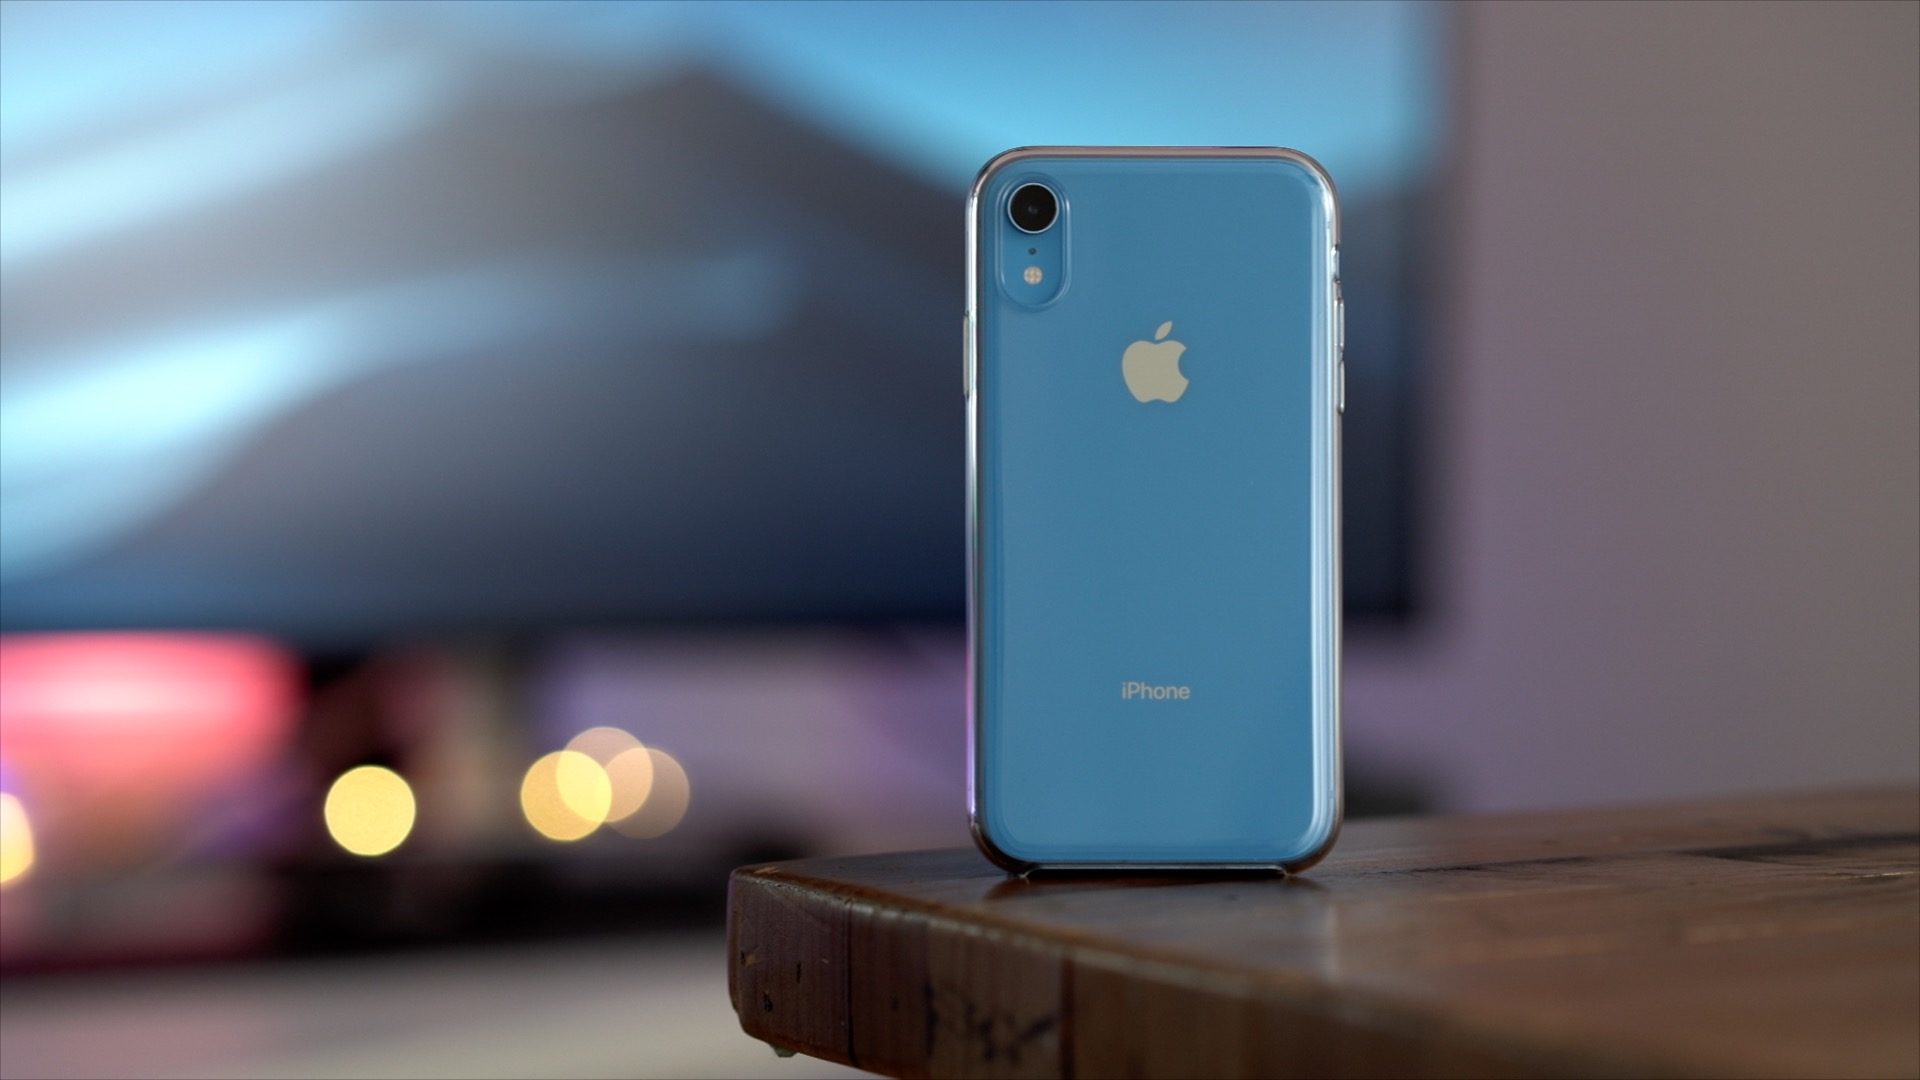 iPhone XR made up 32% of iPhone sales in November